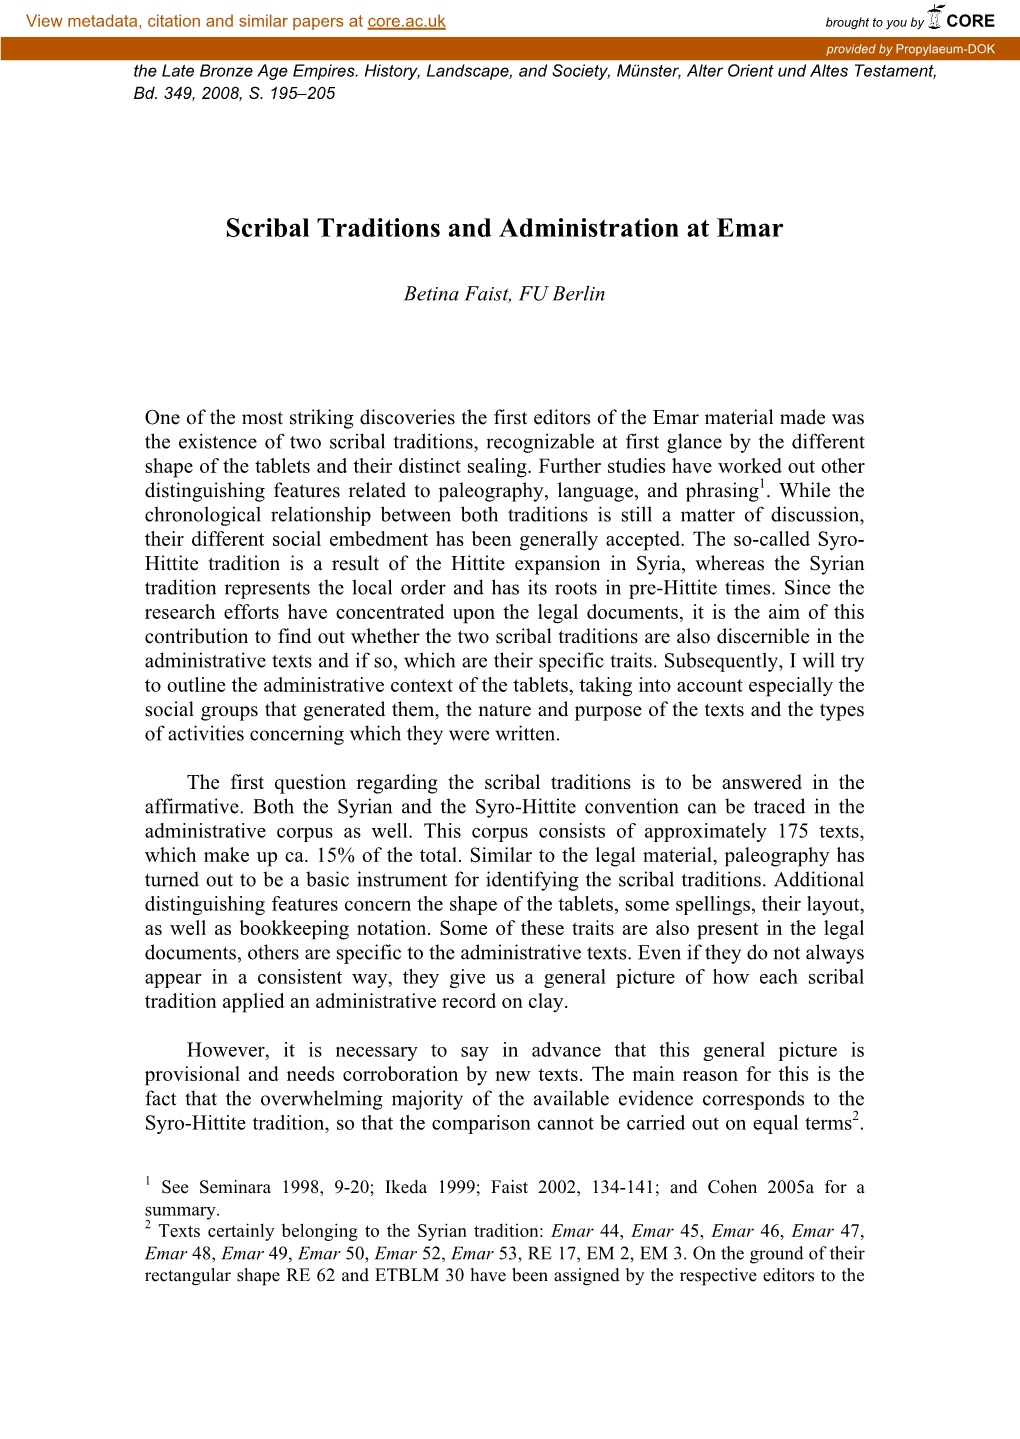 Scribal Traditions and Administration at Emar